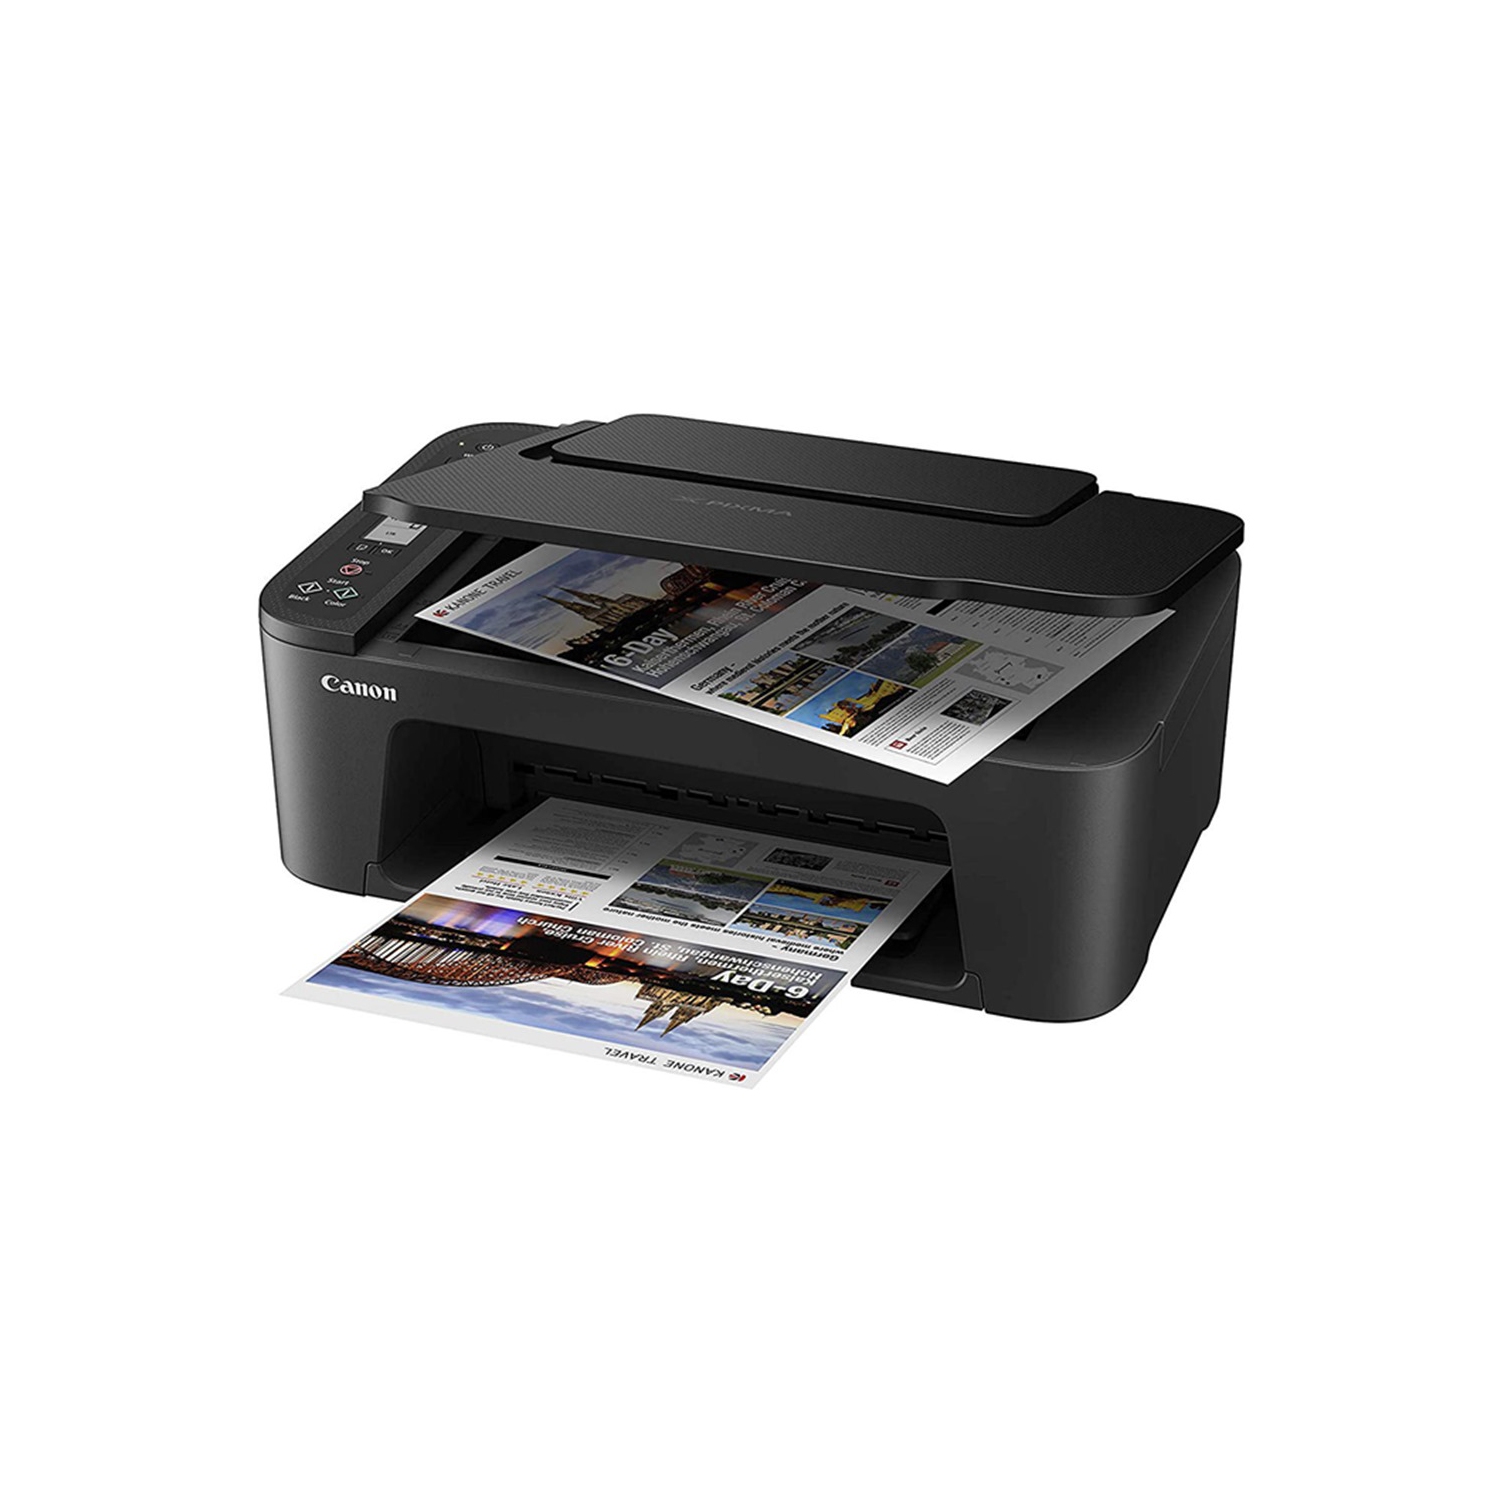 For Canon PIXMA TS3420 Wireless Colour Inkjet Printer with Printing Copying and Scanning For Home Office Use - Black